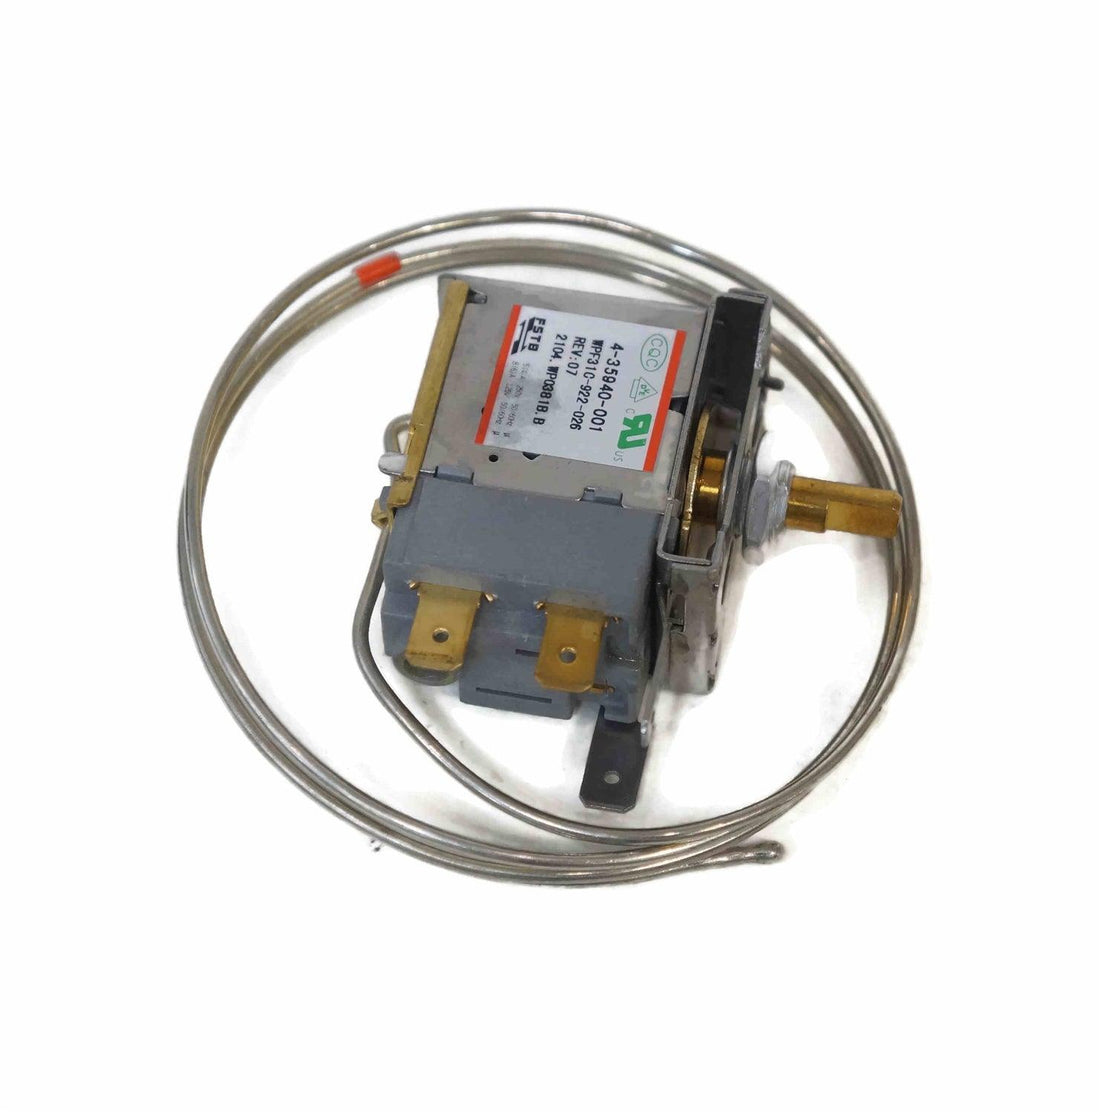 WP4-35940-001 Whirlpool Temperature Control Thermostat